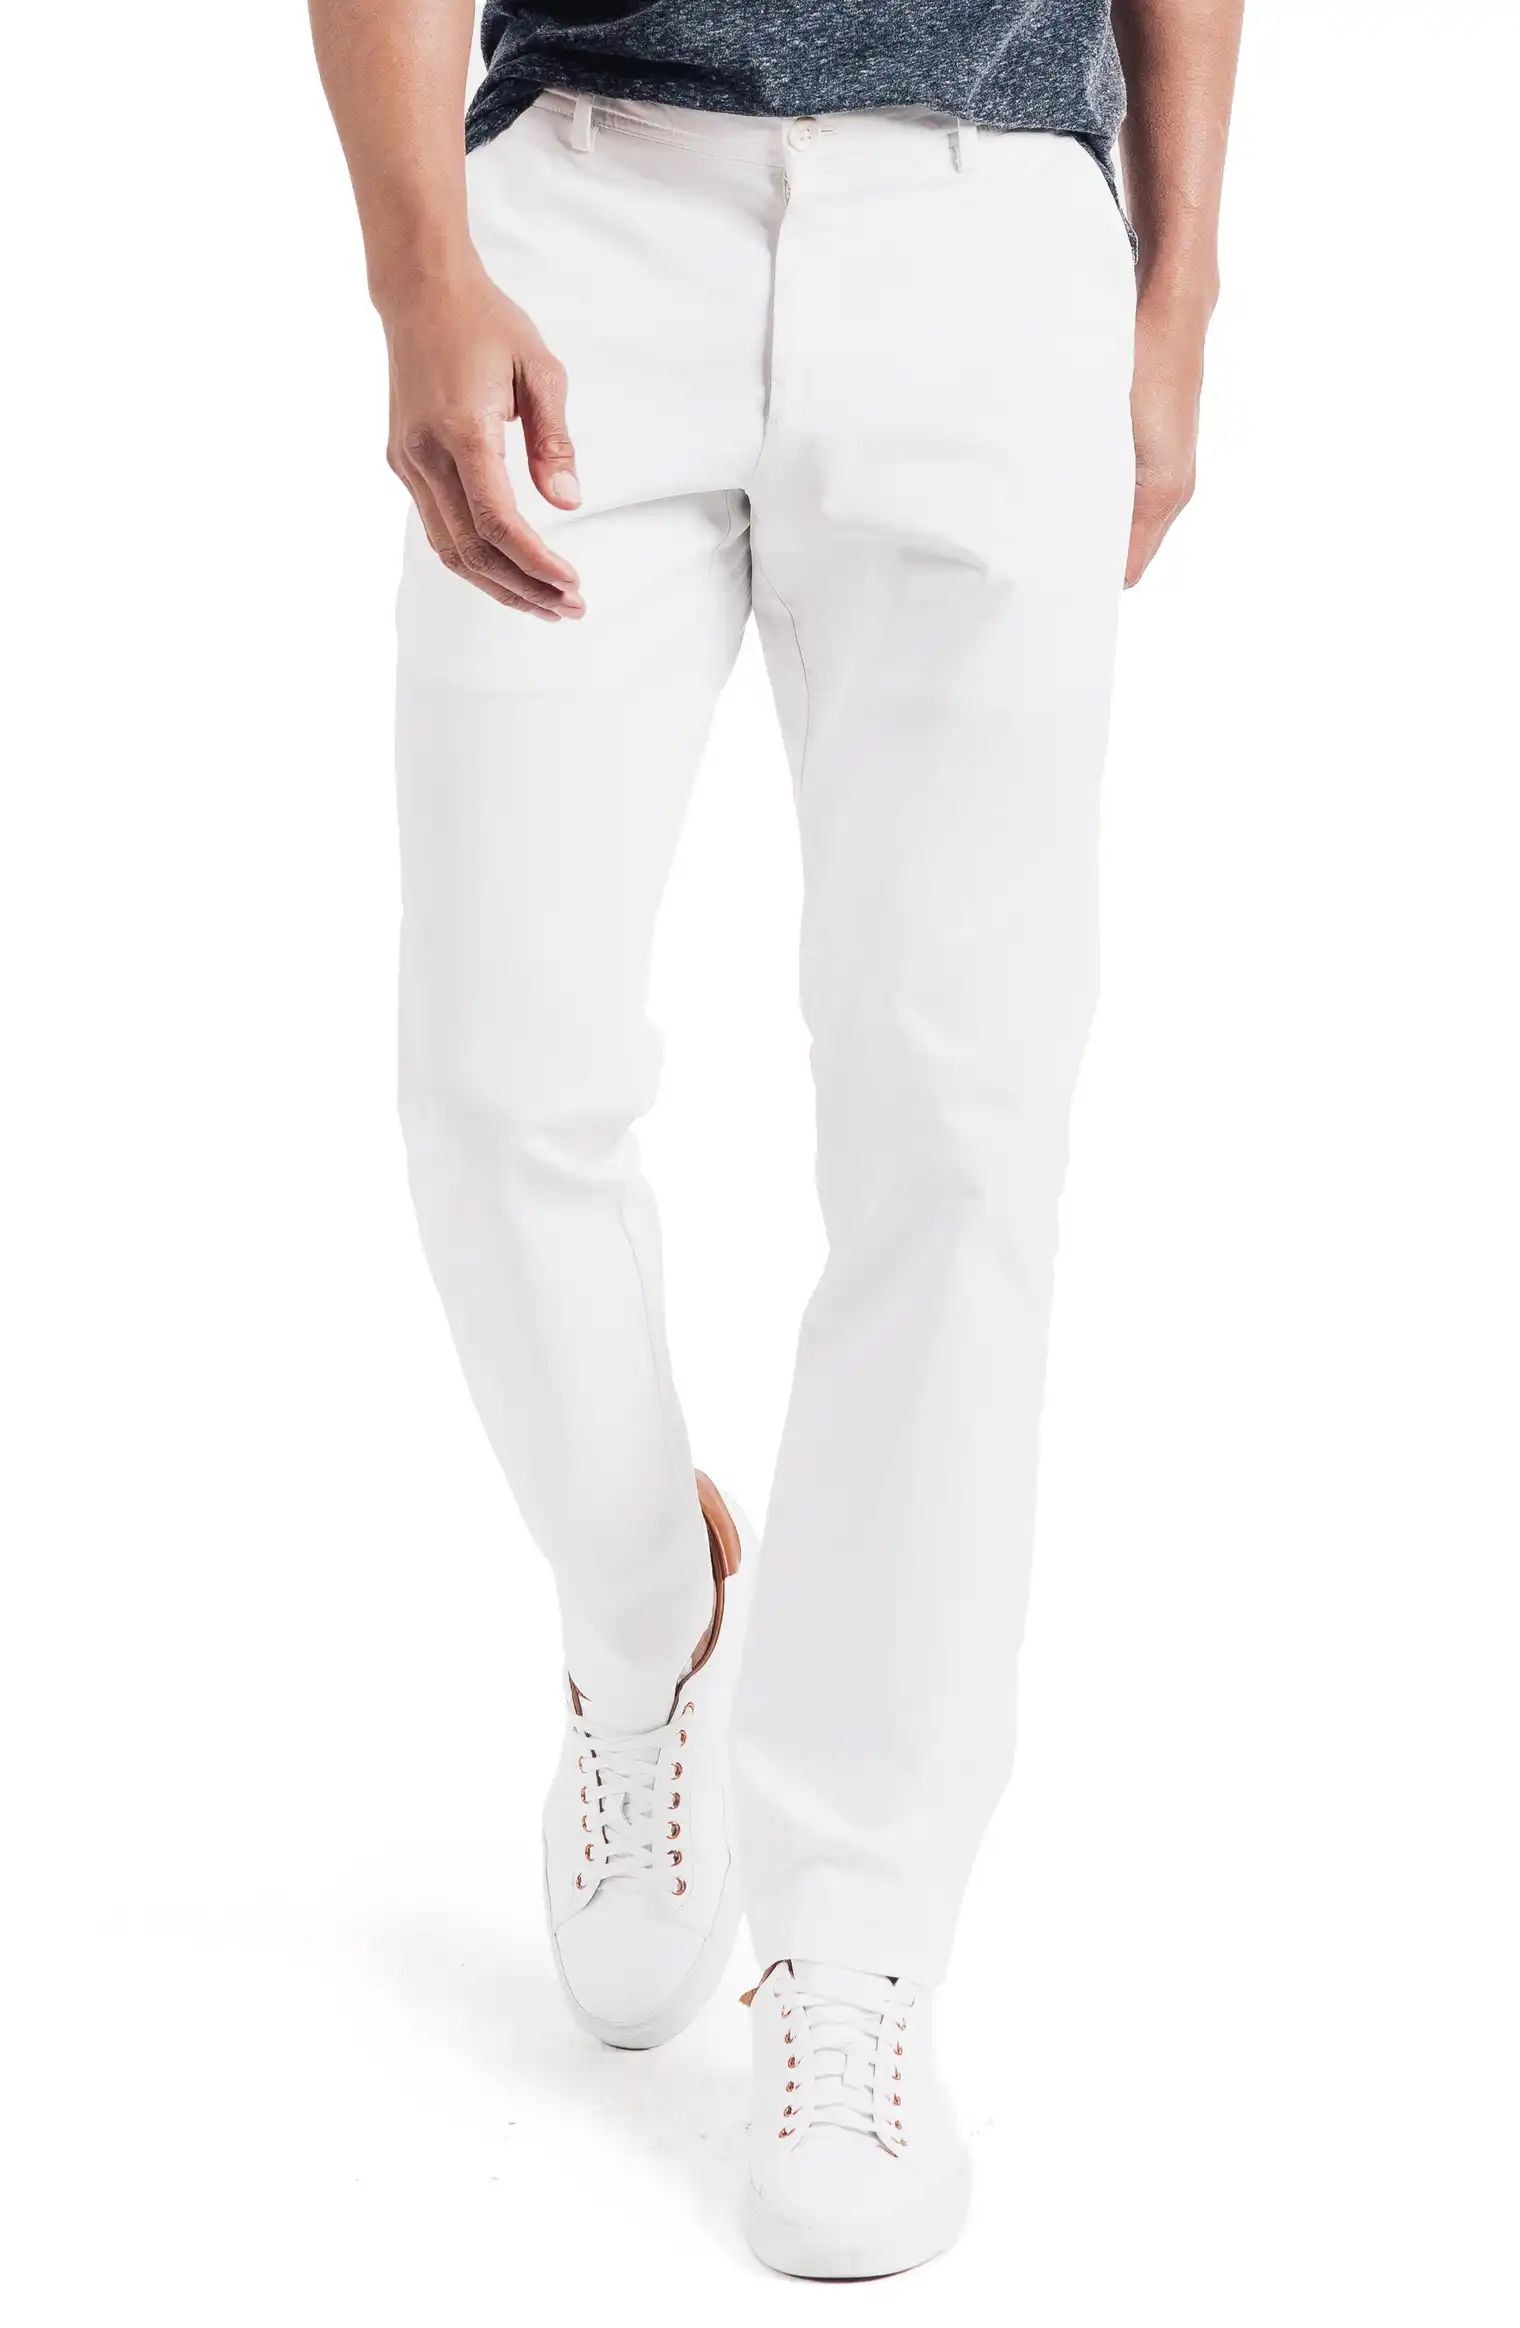 Good Man Brand Soho Slim Fit Flat Front Stretch Cotton Trousers | Nordstrom | Nordstrom